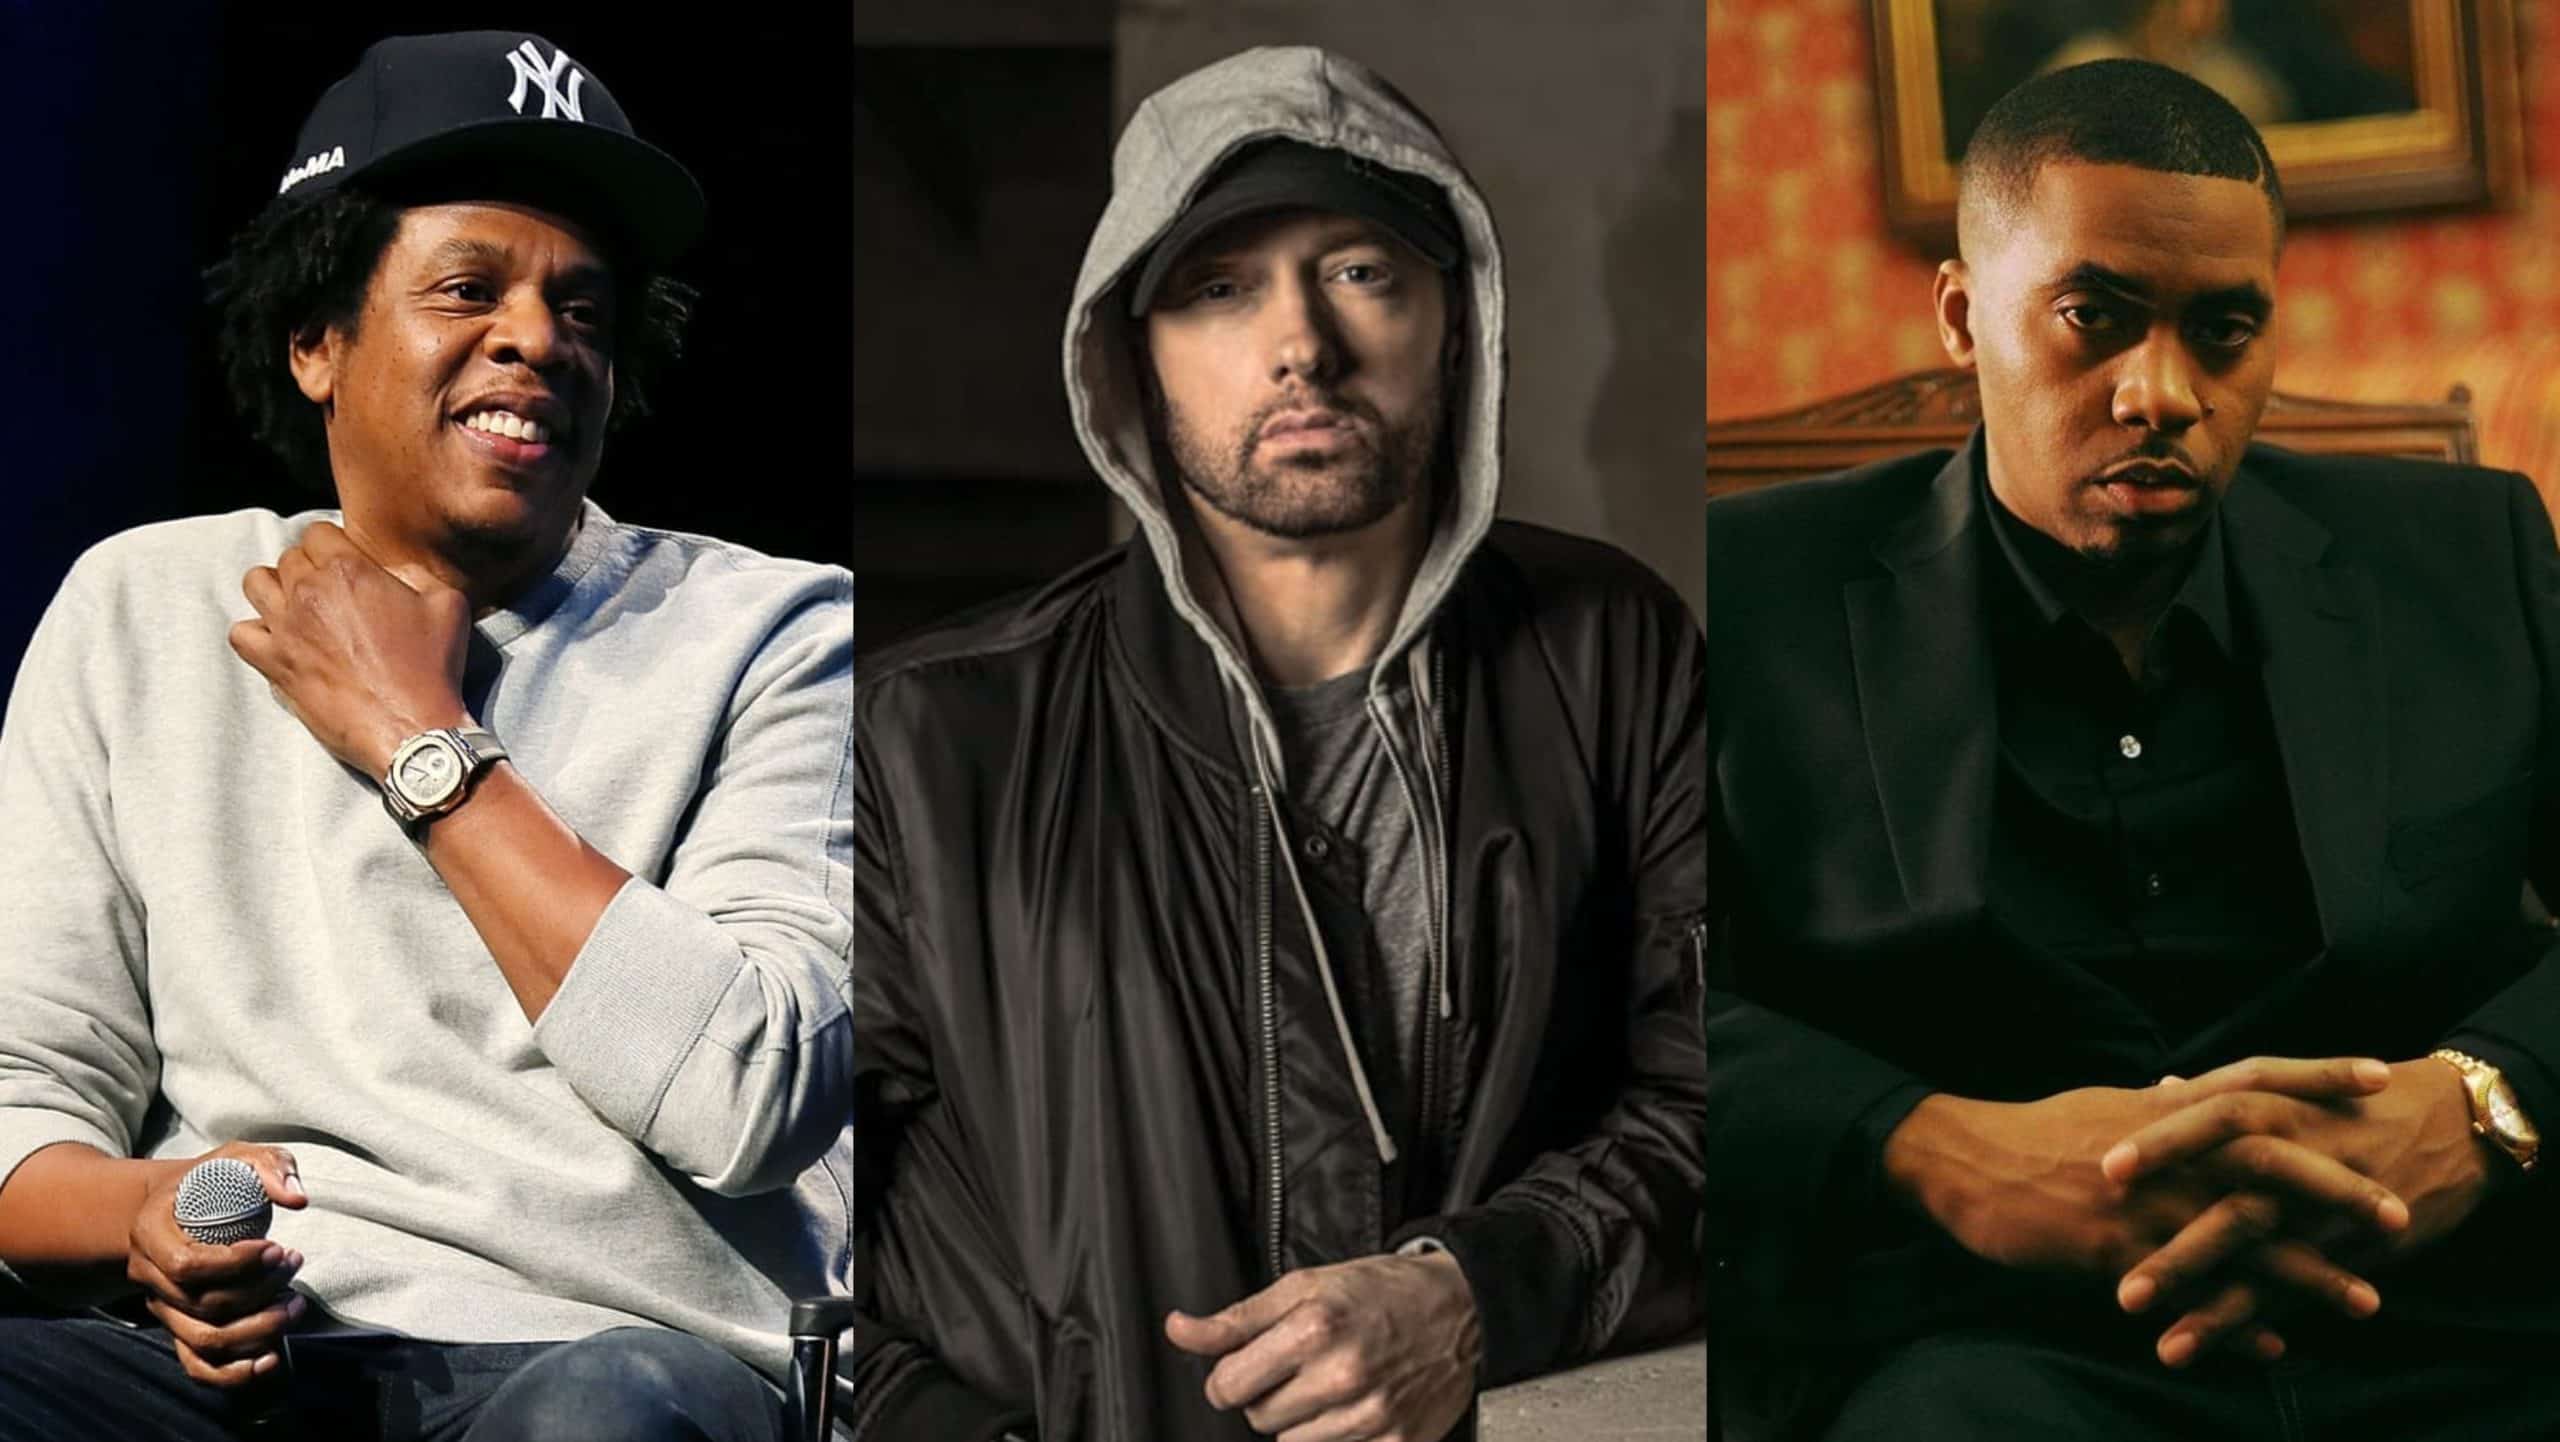 Eminem the Most Mentioned Rapper in Top 5 Lists: Research